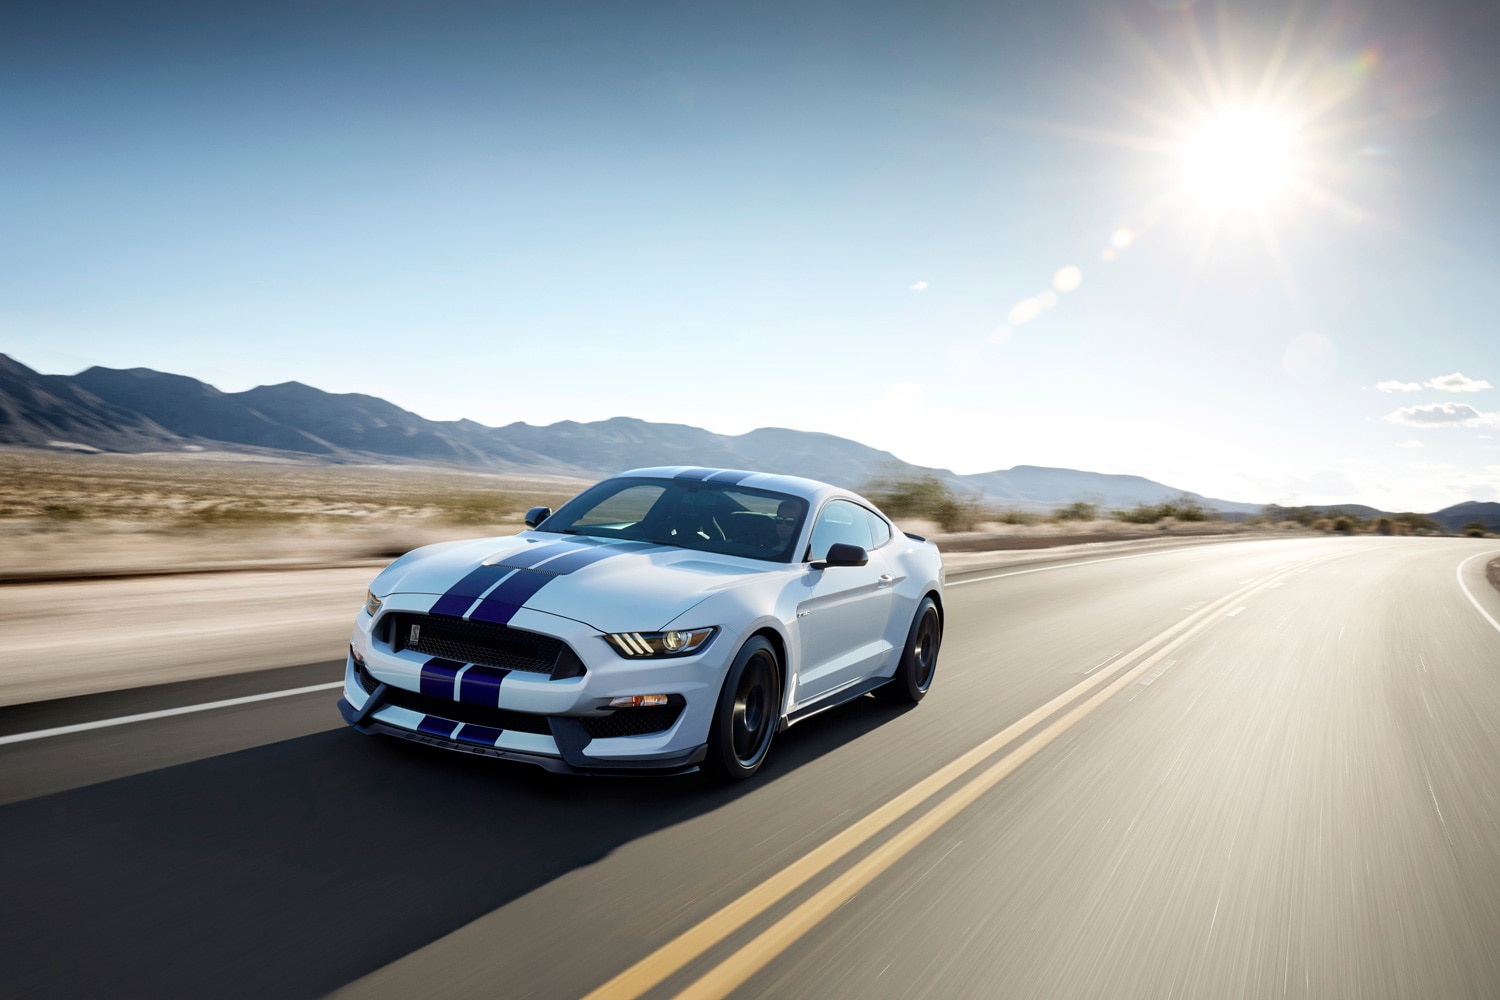 2015 Ford Shelby GT350 Mustang in white with blue stripes driving on a deserted road